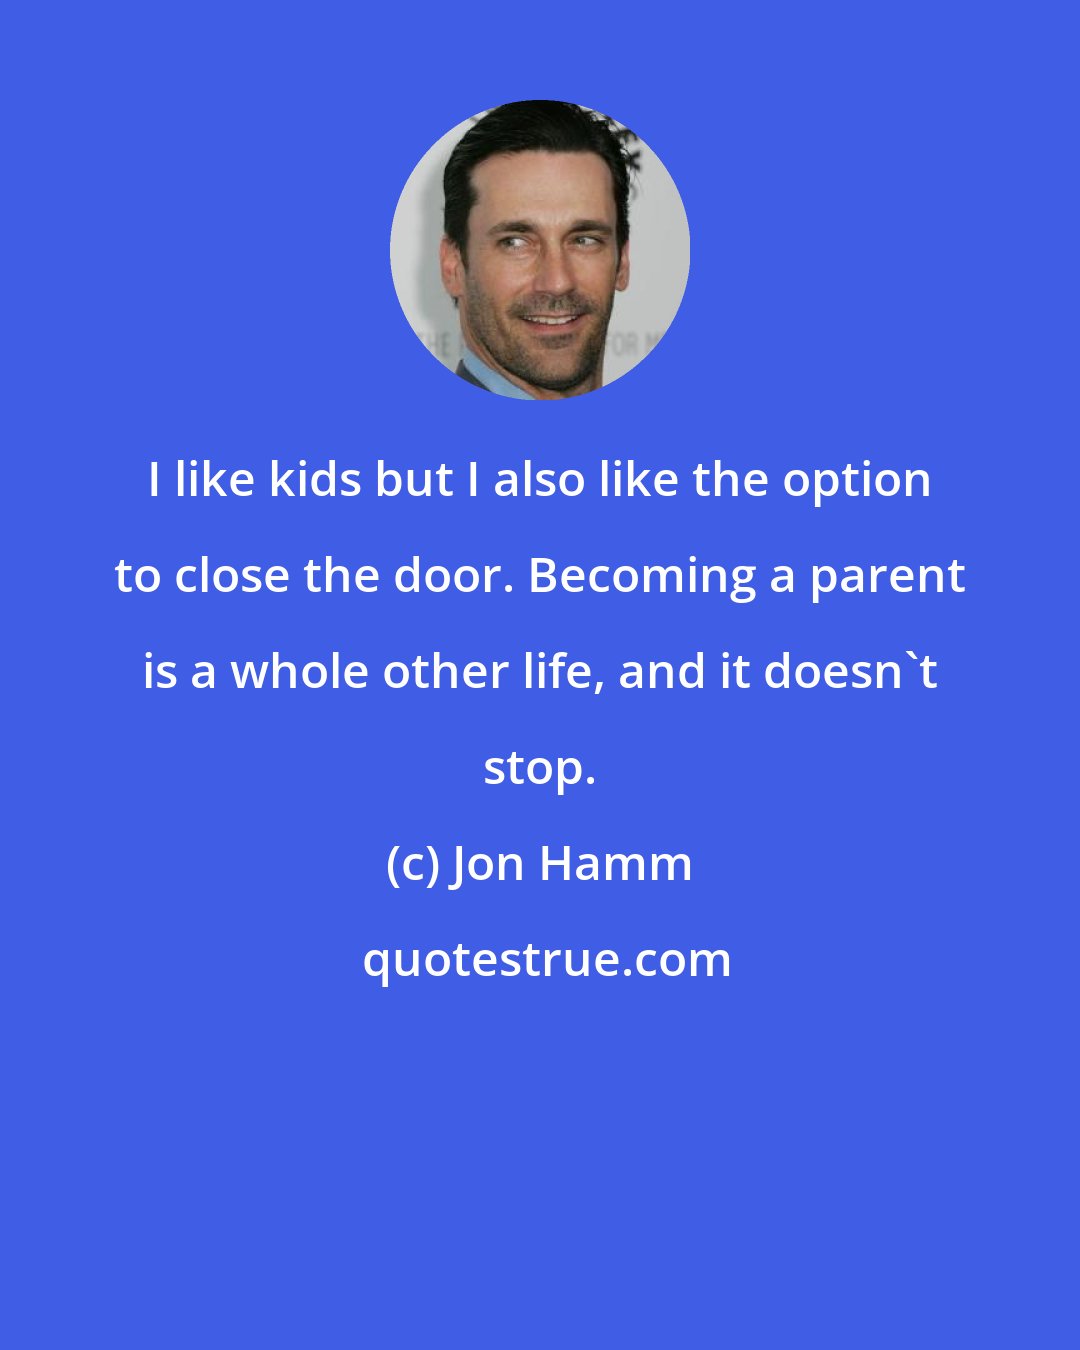 Jon Hamm: I like kids but I also like the option to close the door. Becoming a parent is a whole other life, and it doesn't stop.